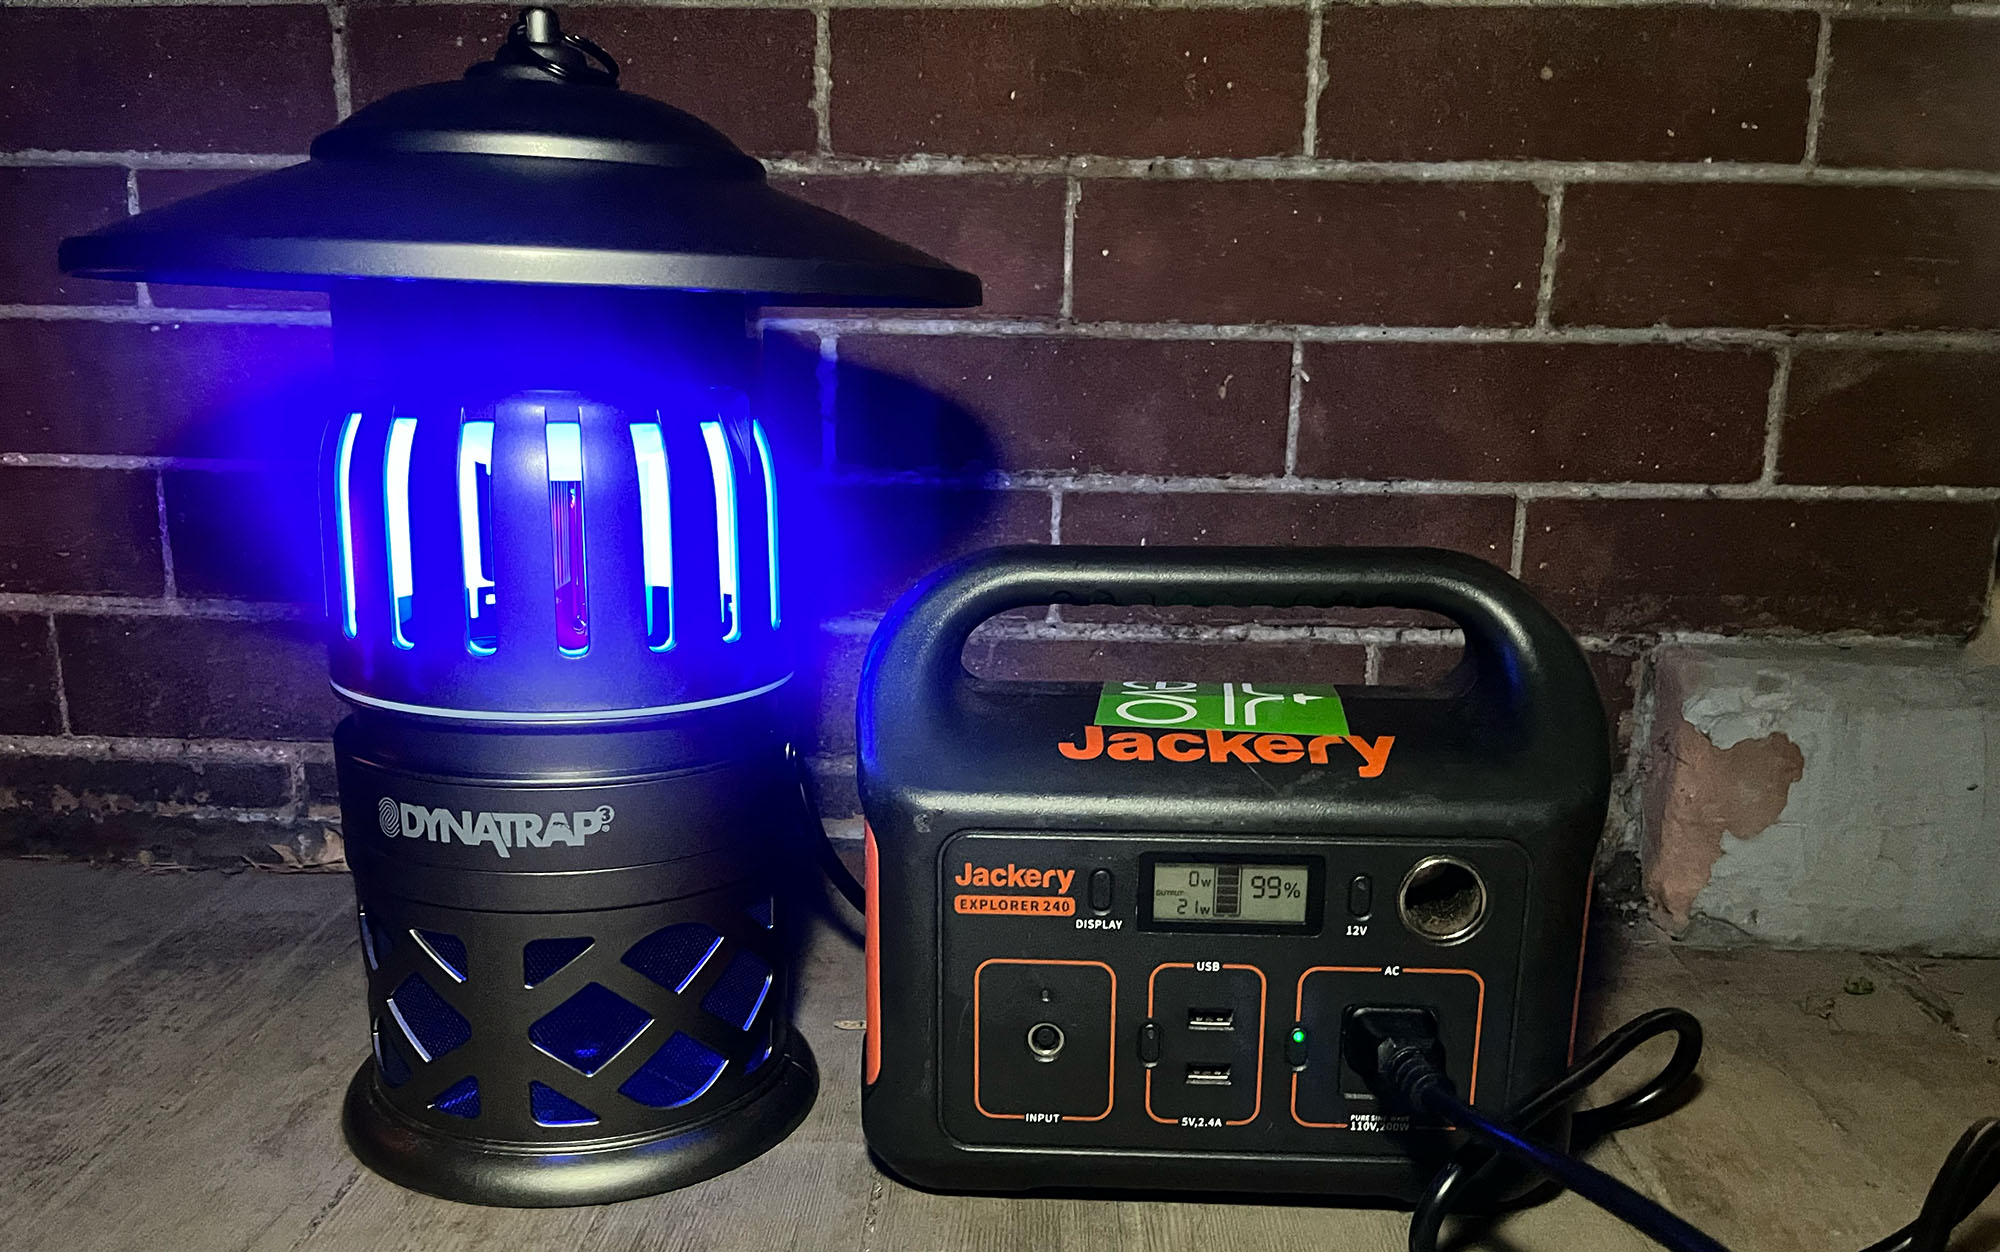 The Jackery Explorer 240 powers the DynaTrap ½ Acre Mosquito Trap.